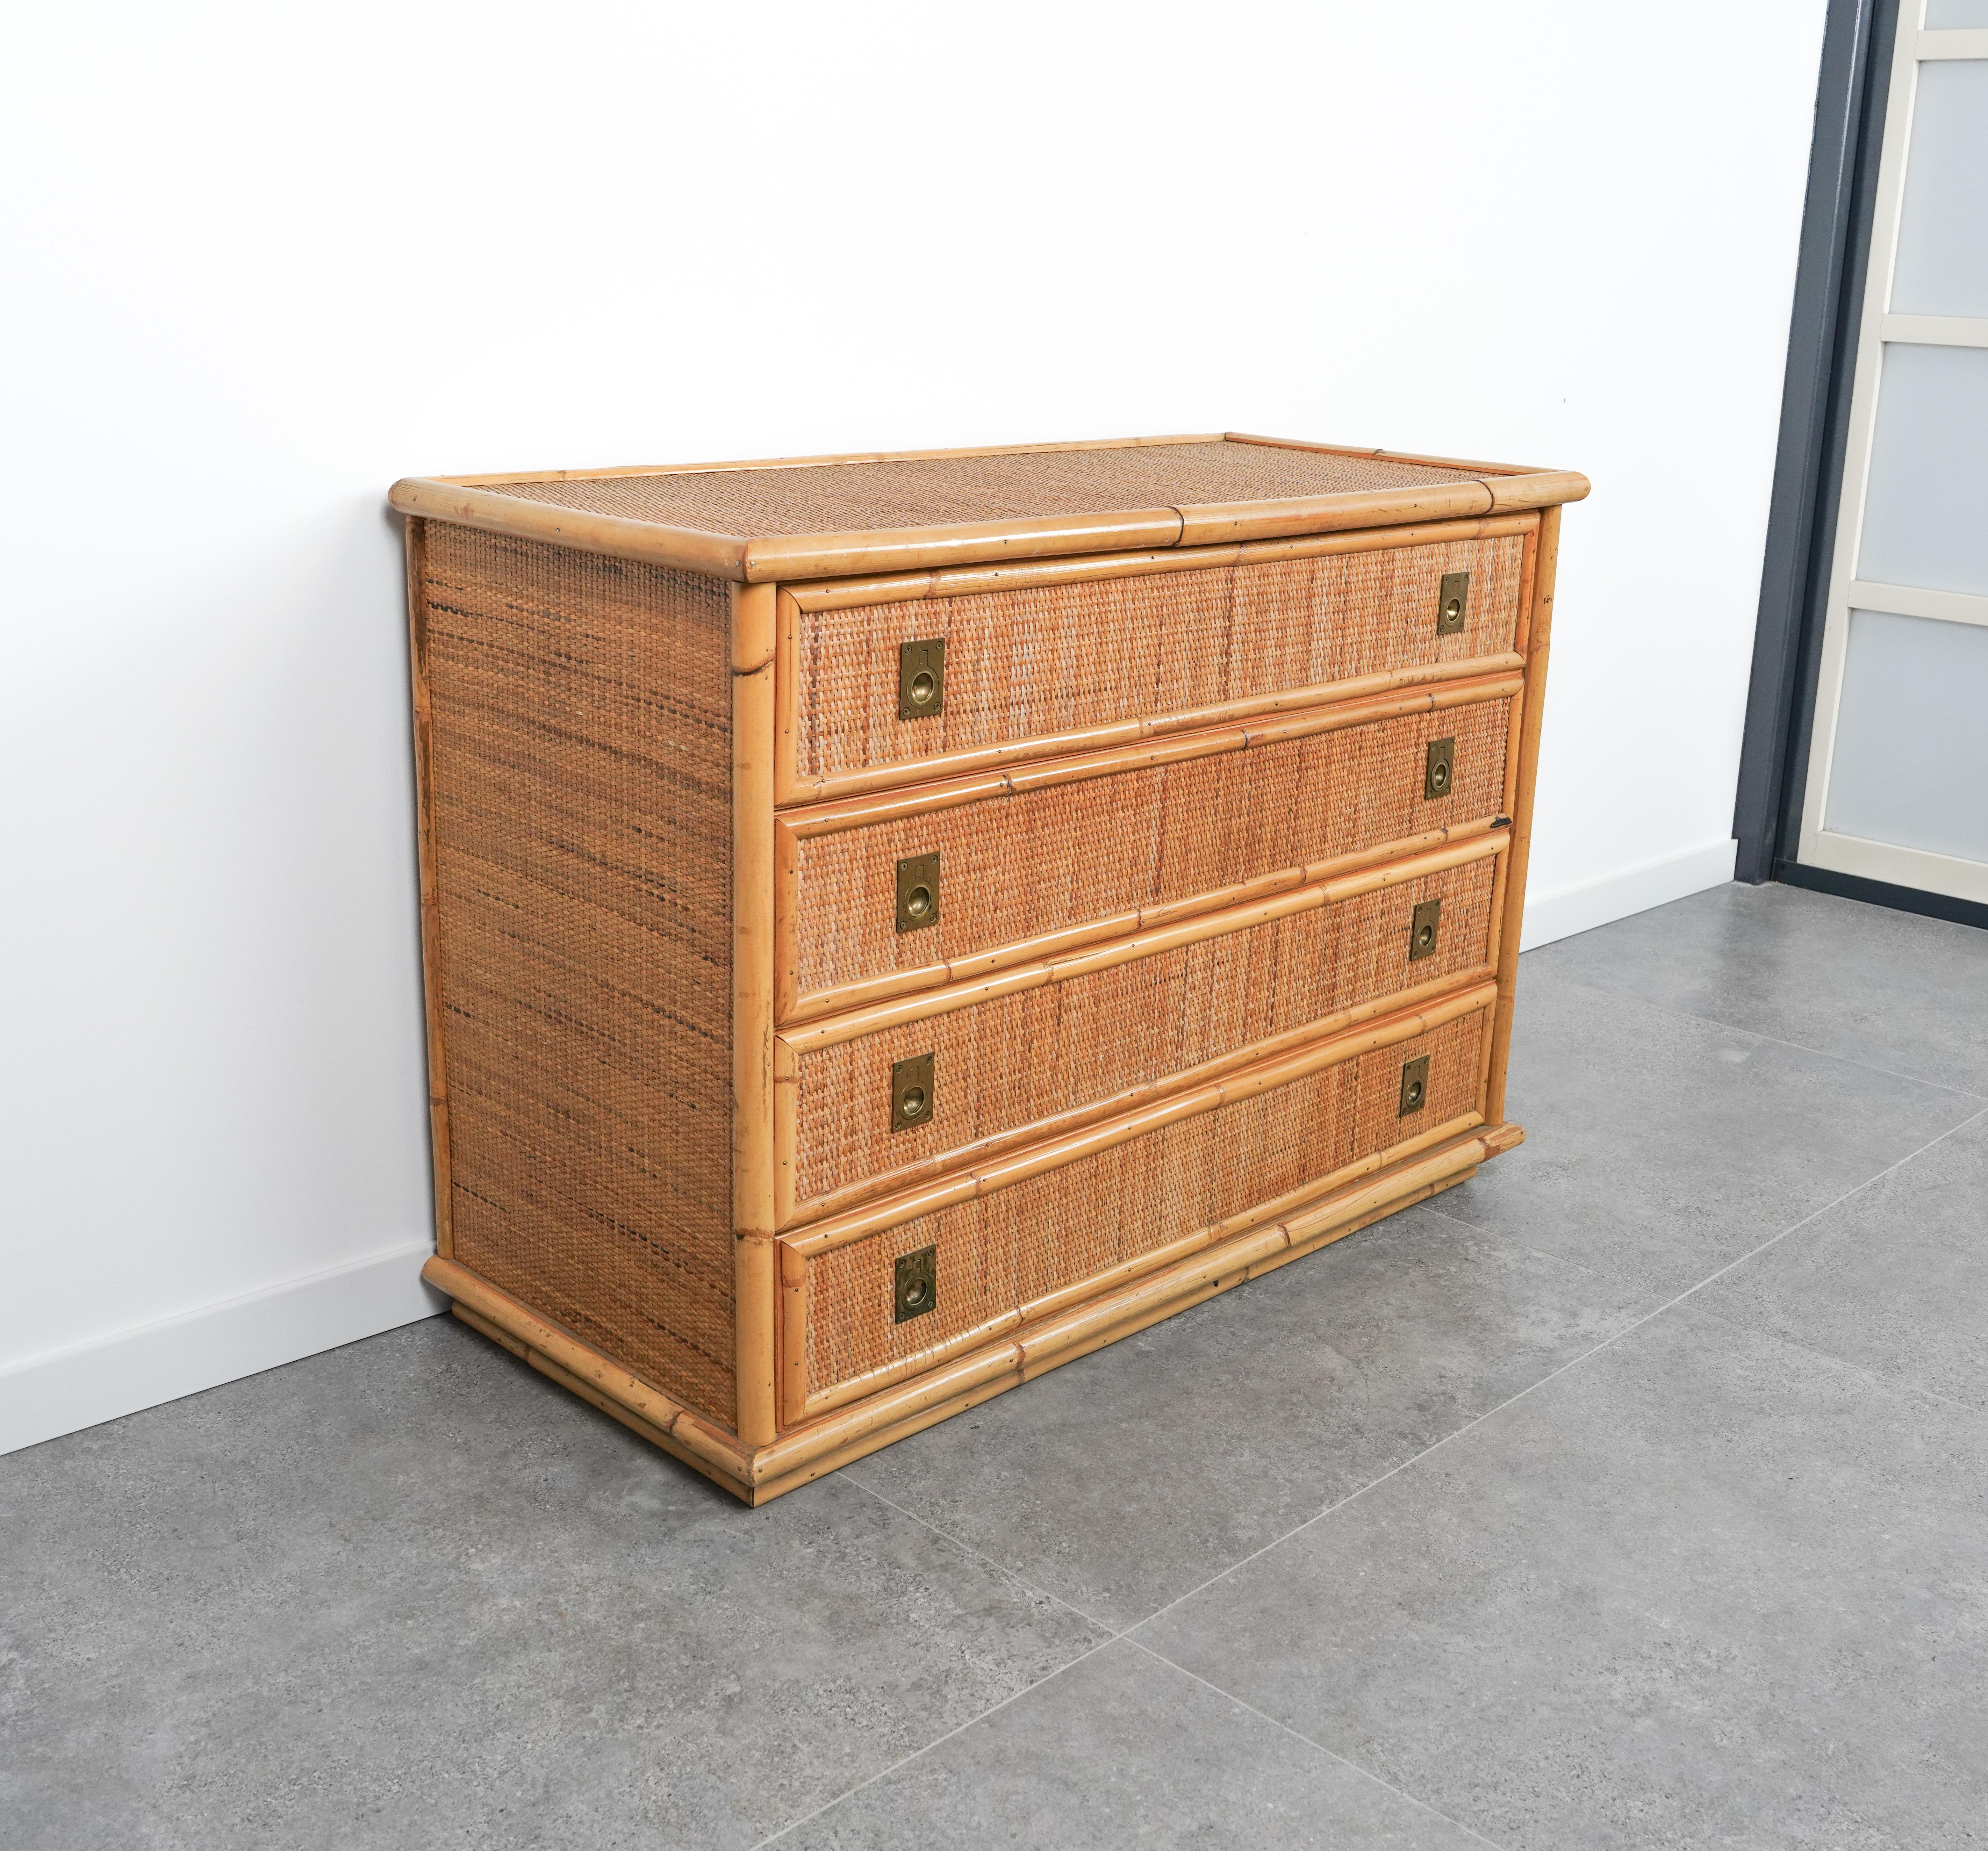 Italian Midcentury Bamboo, Rattan and Brass Chest of Drawers by Dal Vera, Italy, 1970s For Sale